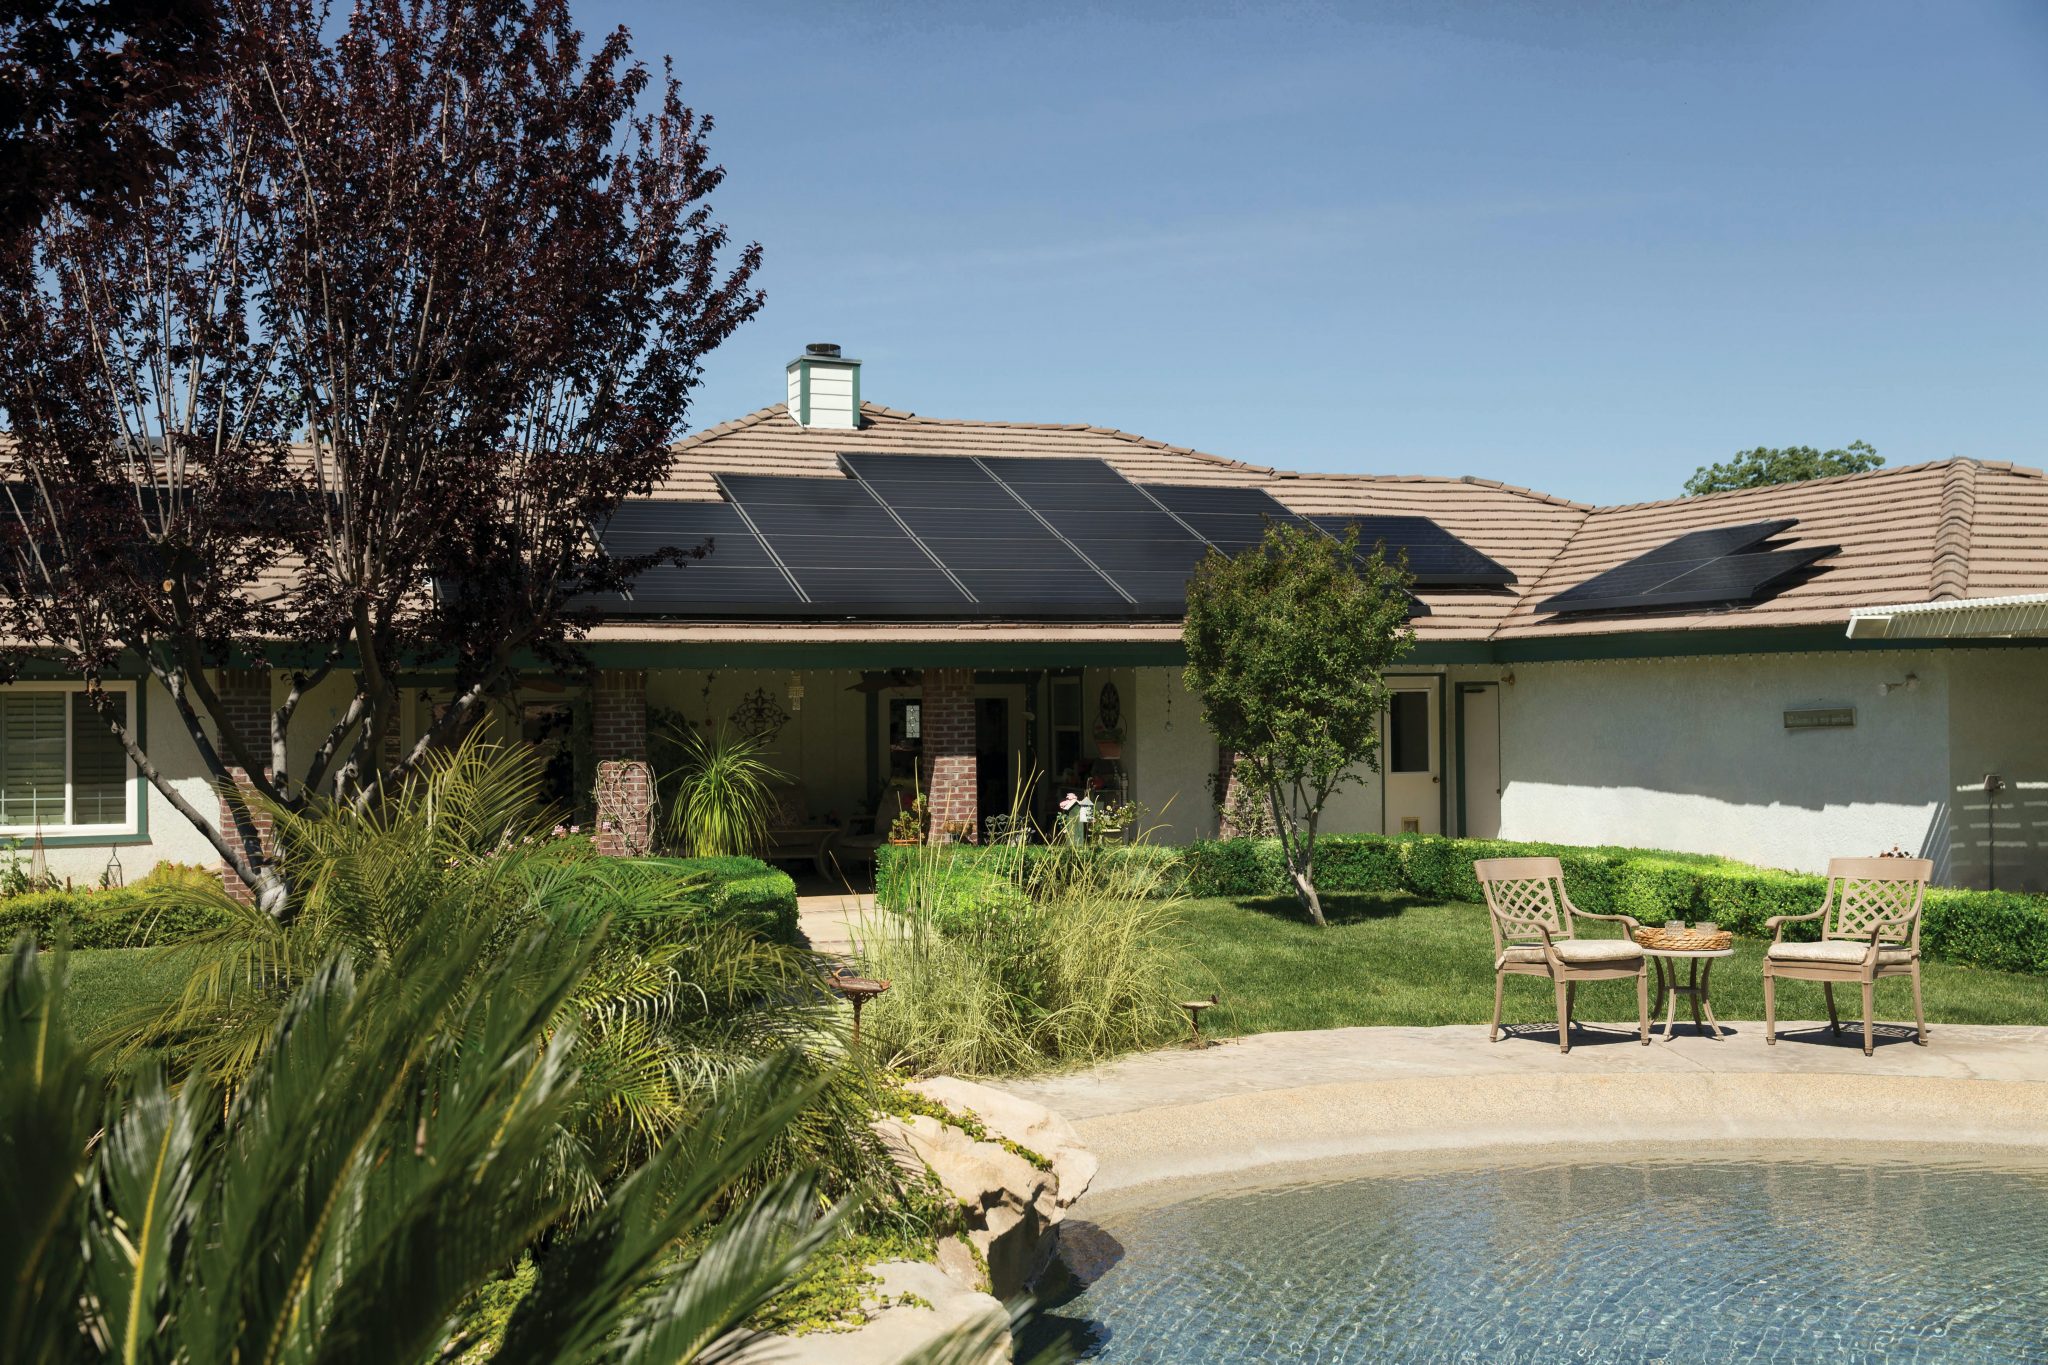 The Advantages Of Home Solar Panels